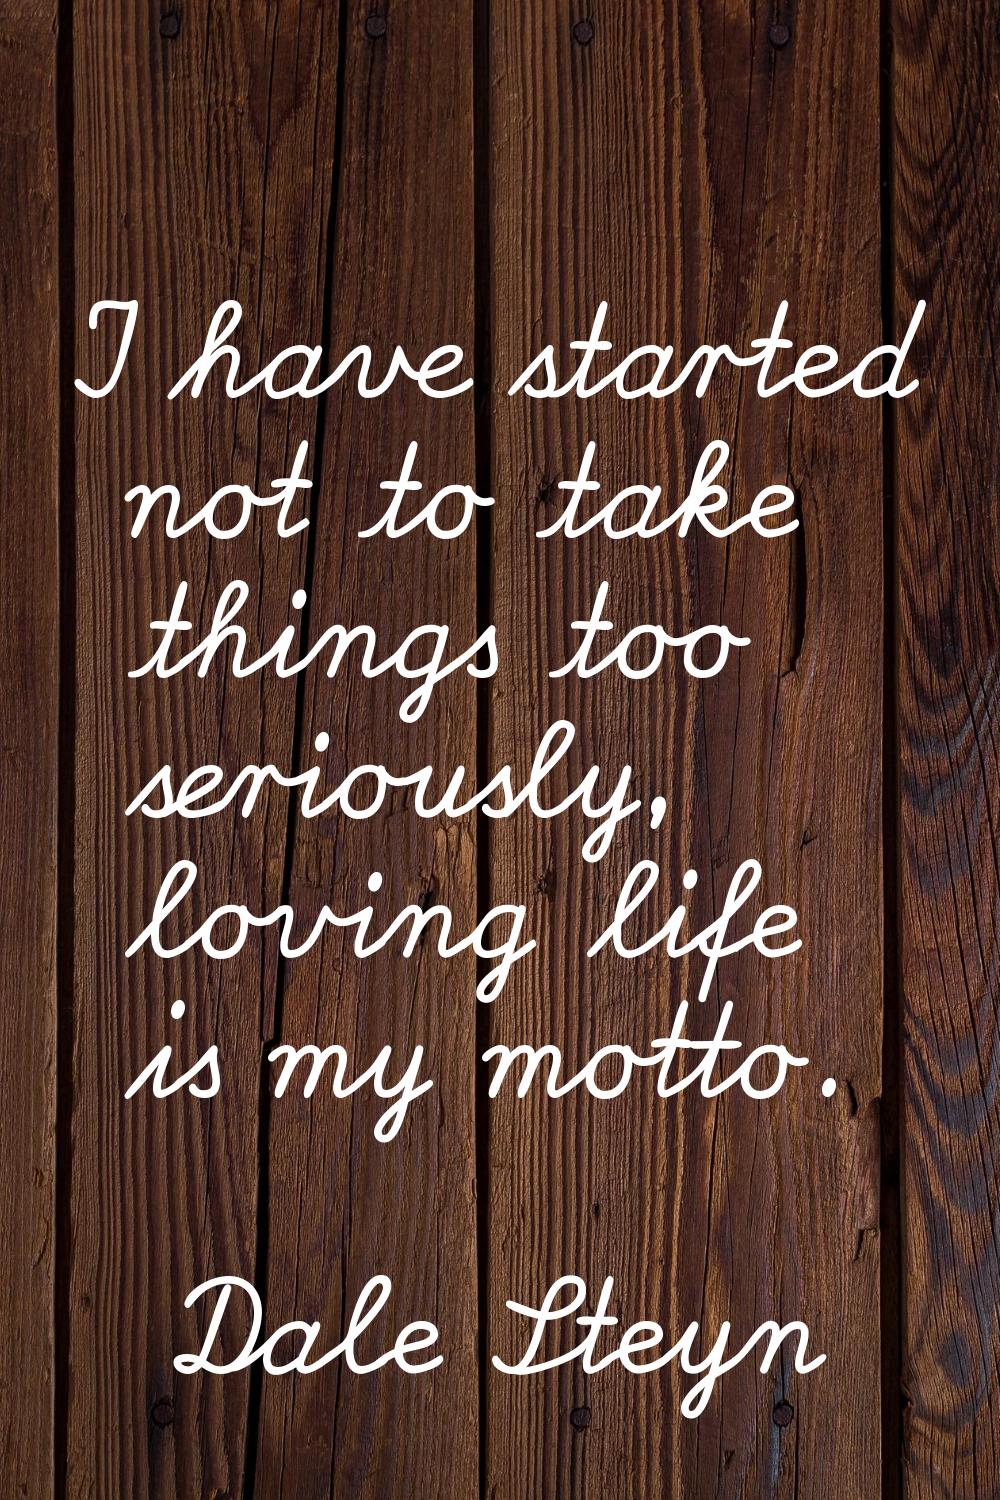 I have started not to take things too seriously, loving life is my motto.